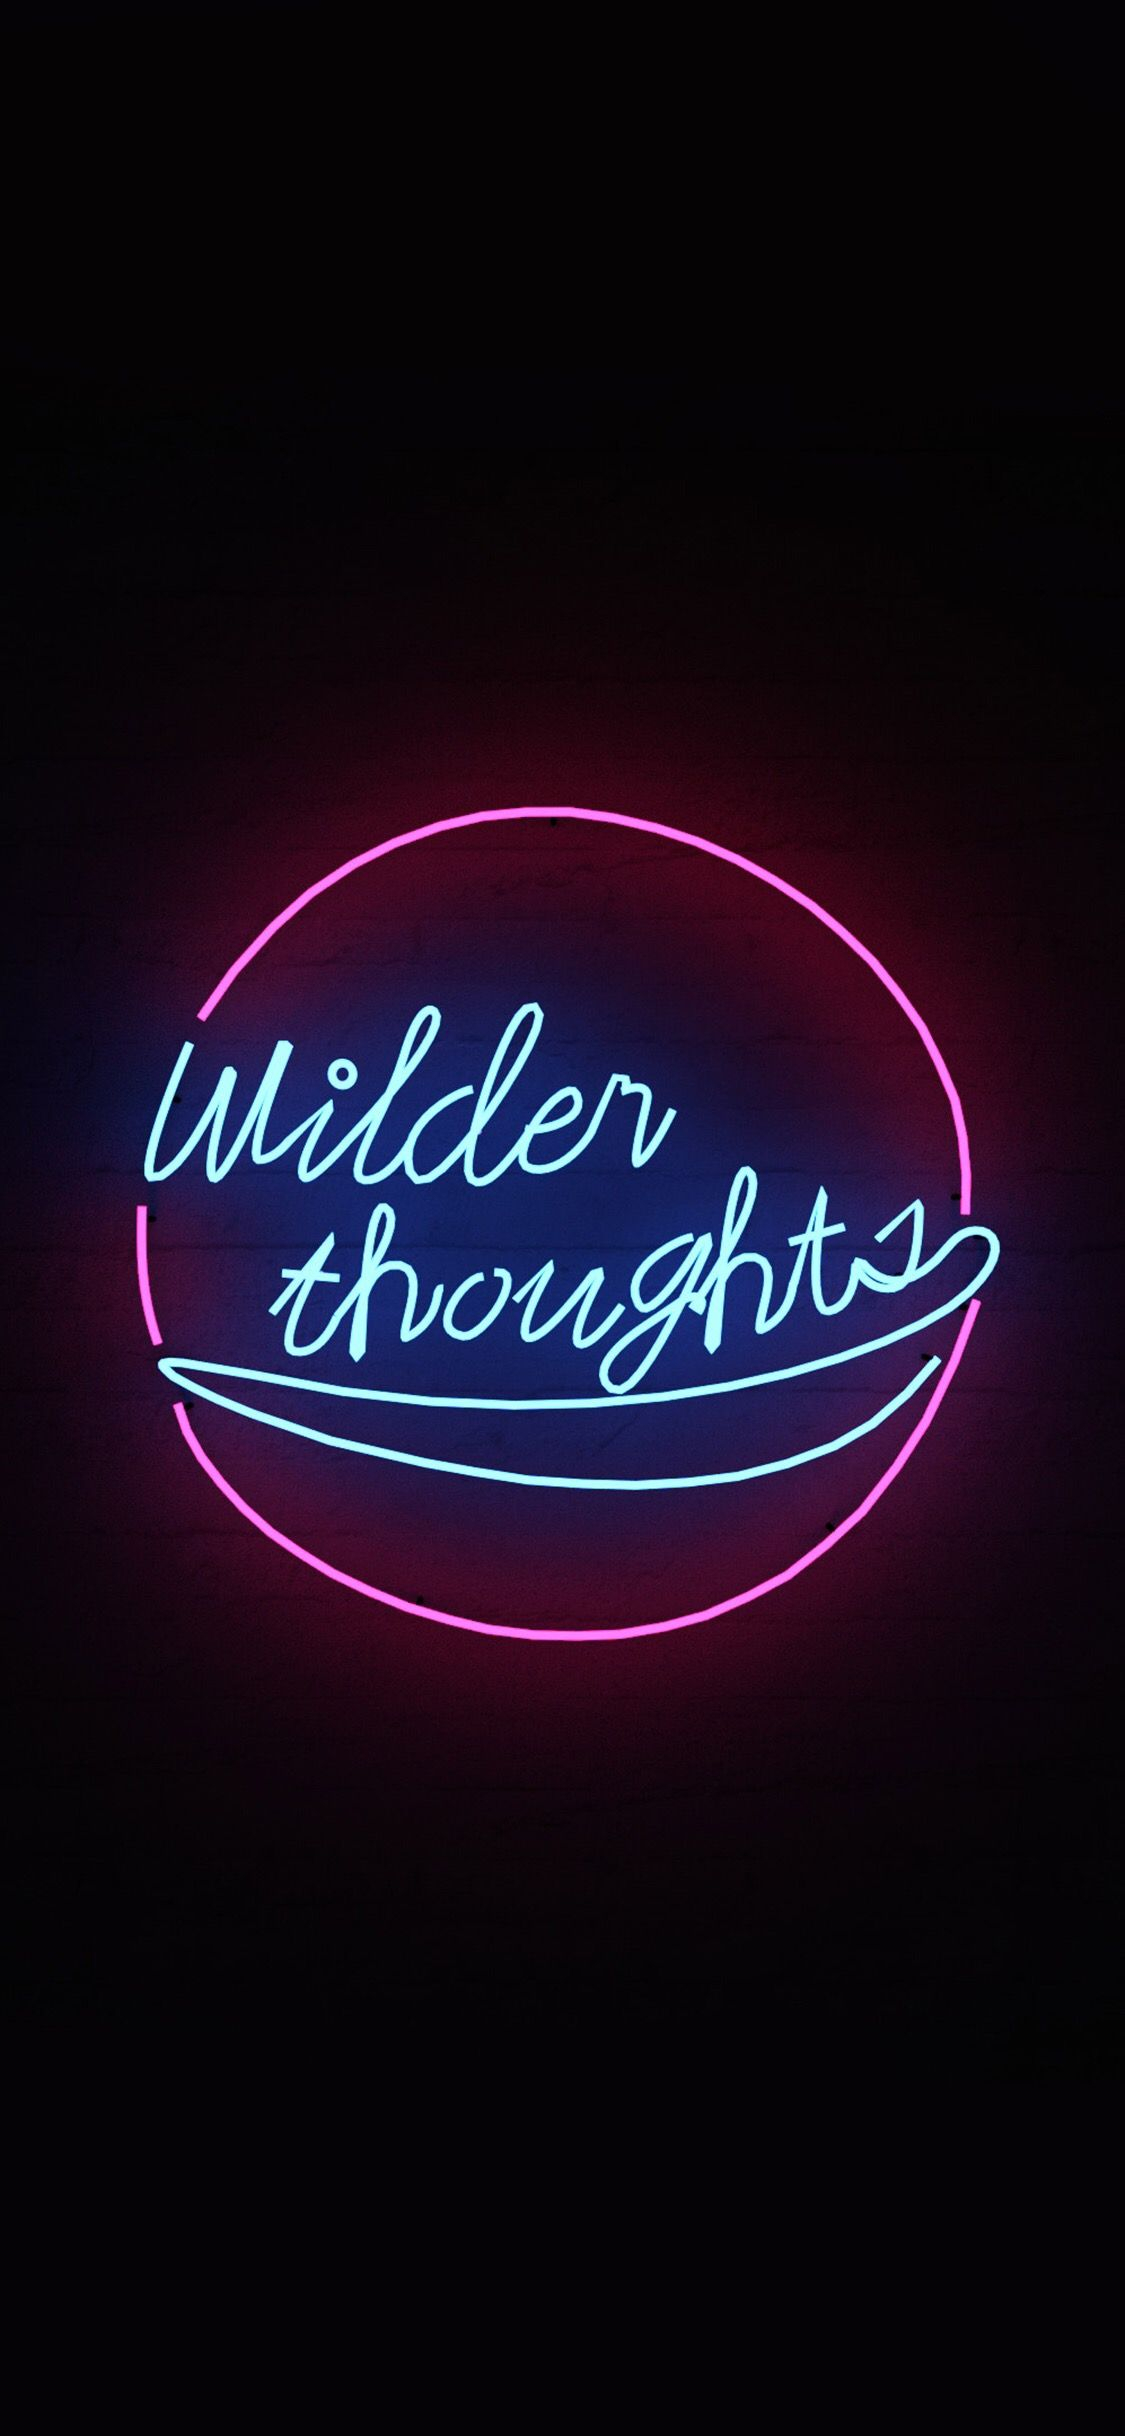 1125x2436 Pin by Hattie on My Saves | Neon signs, Neon wallpaper, Neon words